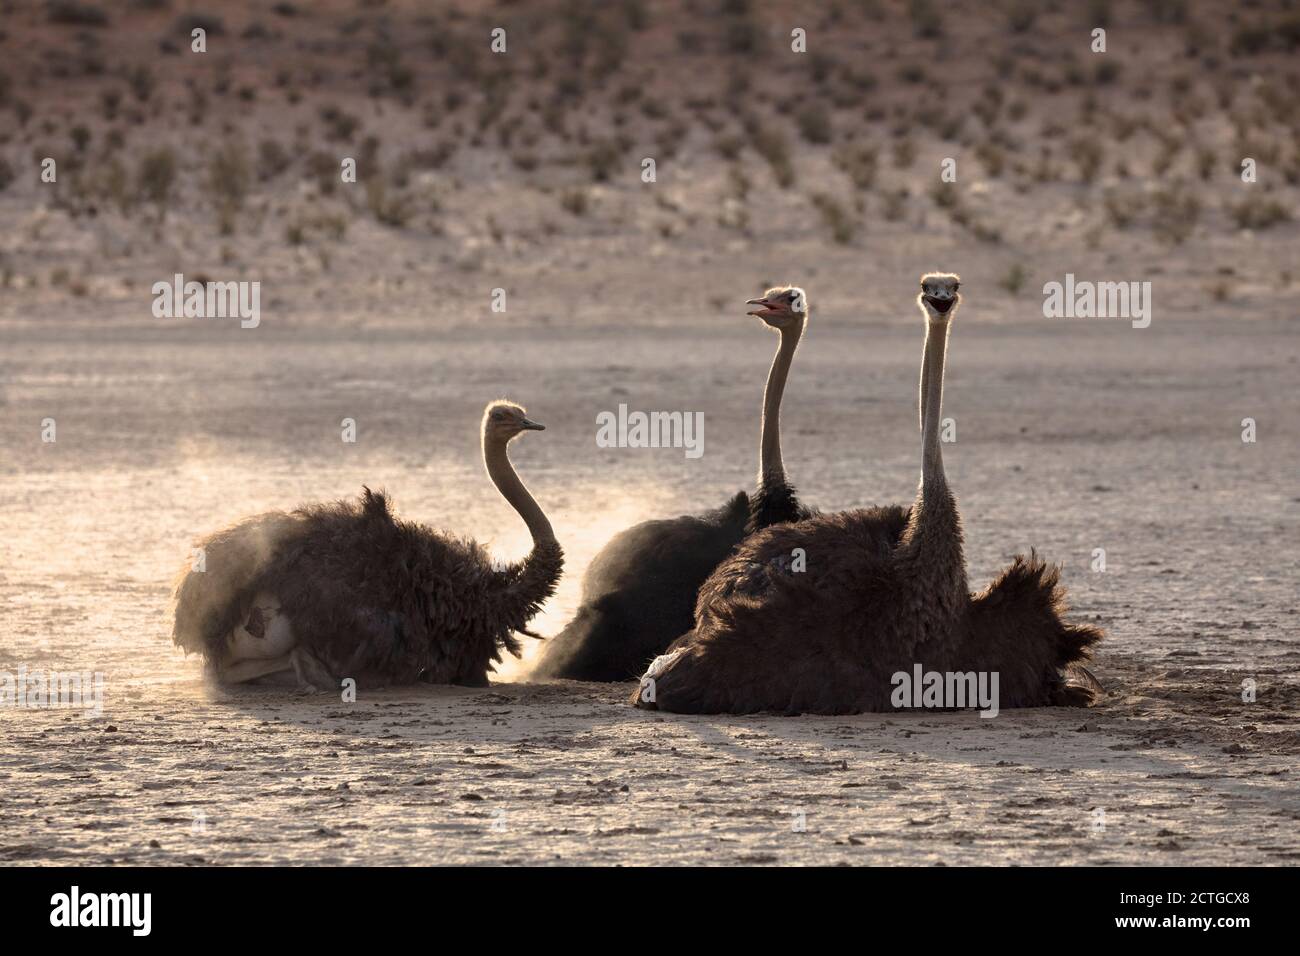 Ostrich (Struthio camelus) dusting, Kgalagadi transfrontier park, South Africa Stock Photo